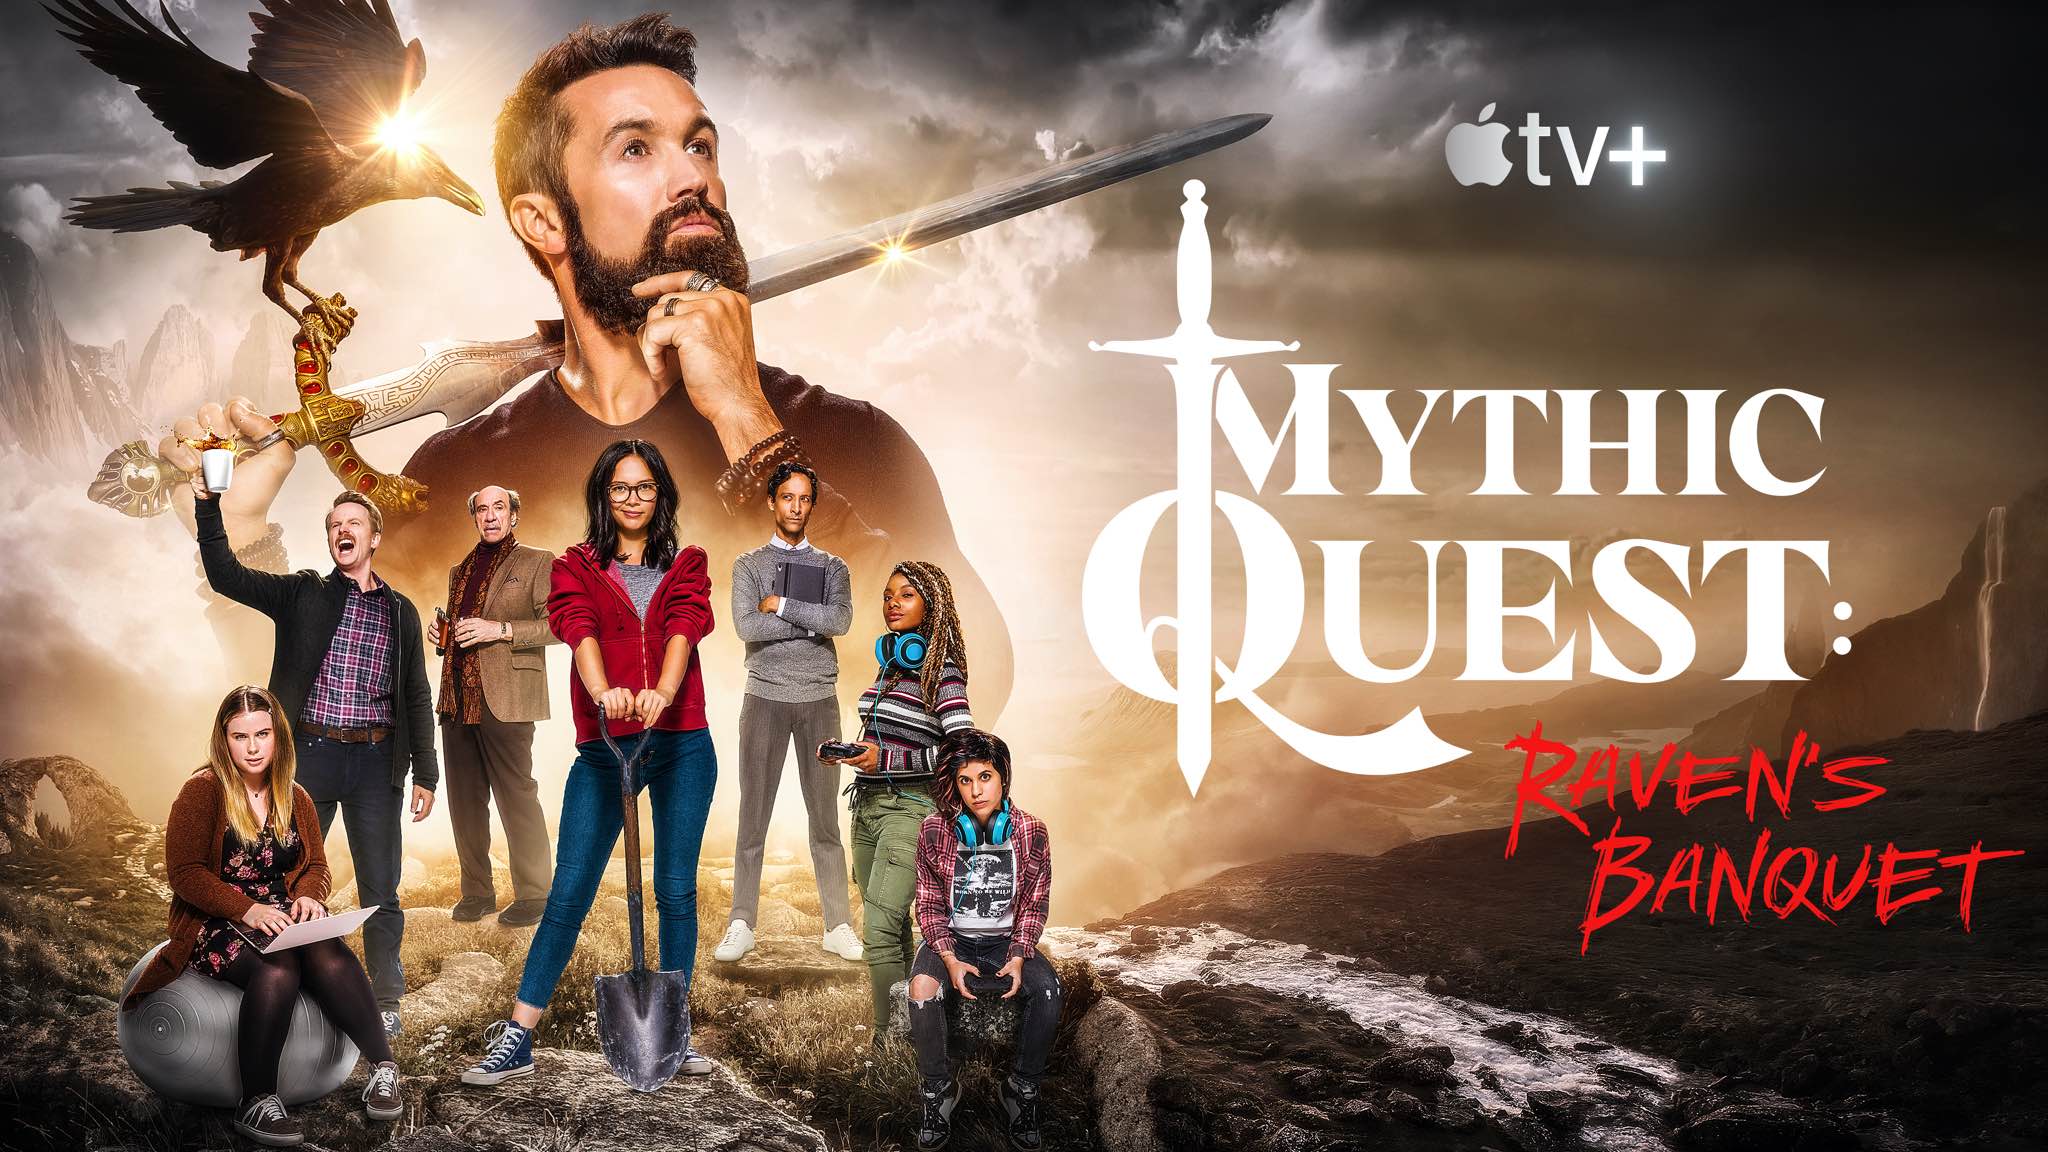 Apple TV+ 'Mythic Quest' to be Shown on PAX South